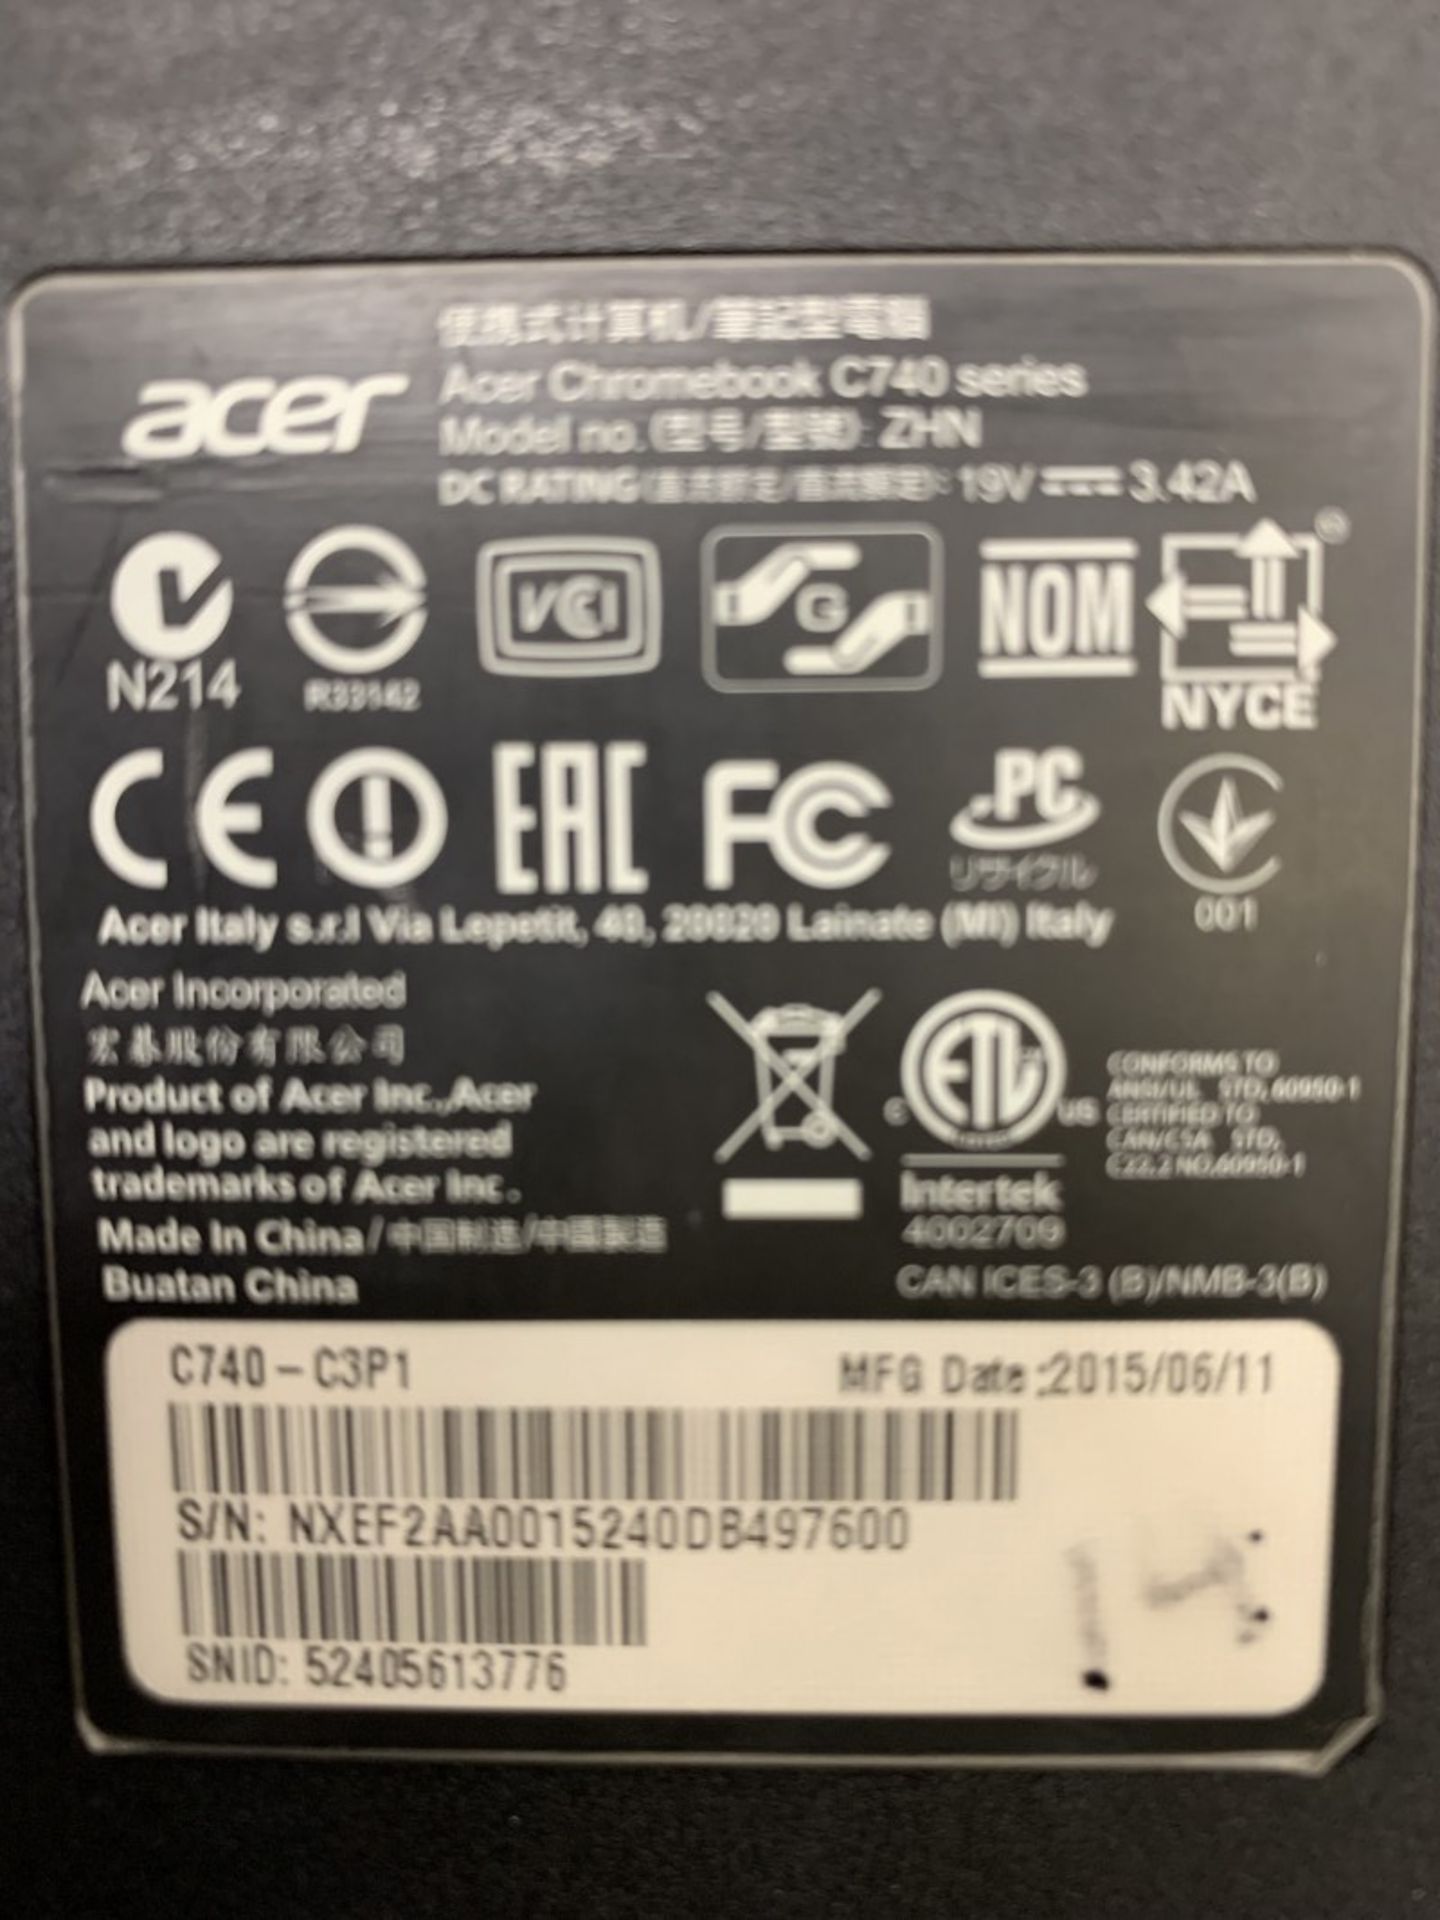 Acer - Chromebook C740 Series 11.6-Inch Hd, 4 Gb, 16Gb Ssd - Image 2 of 2